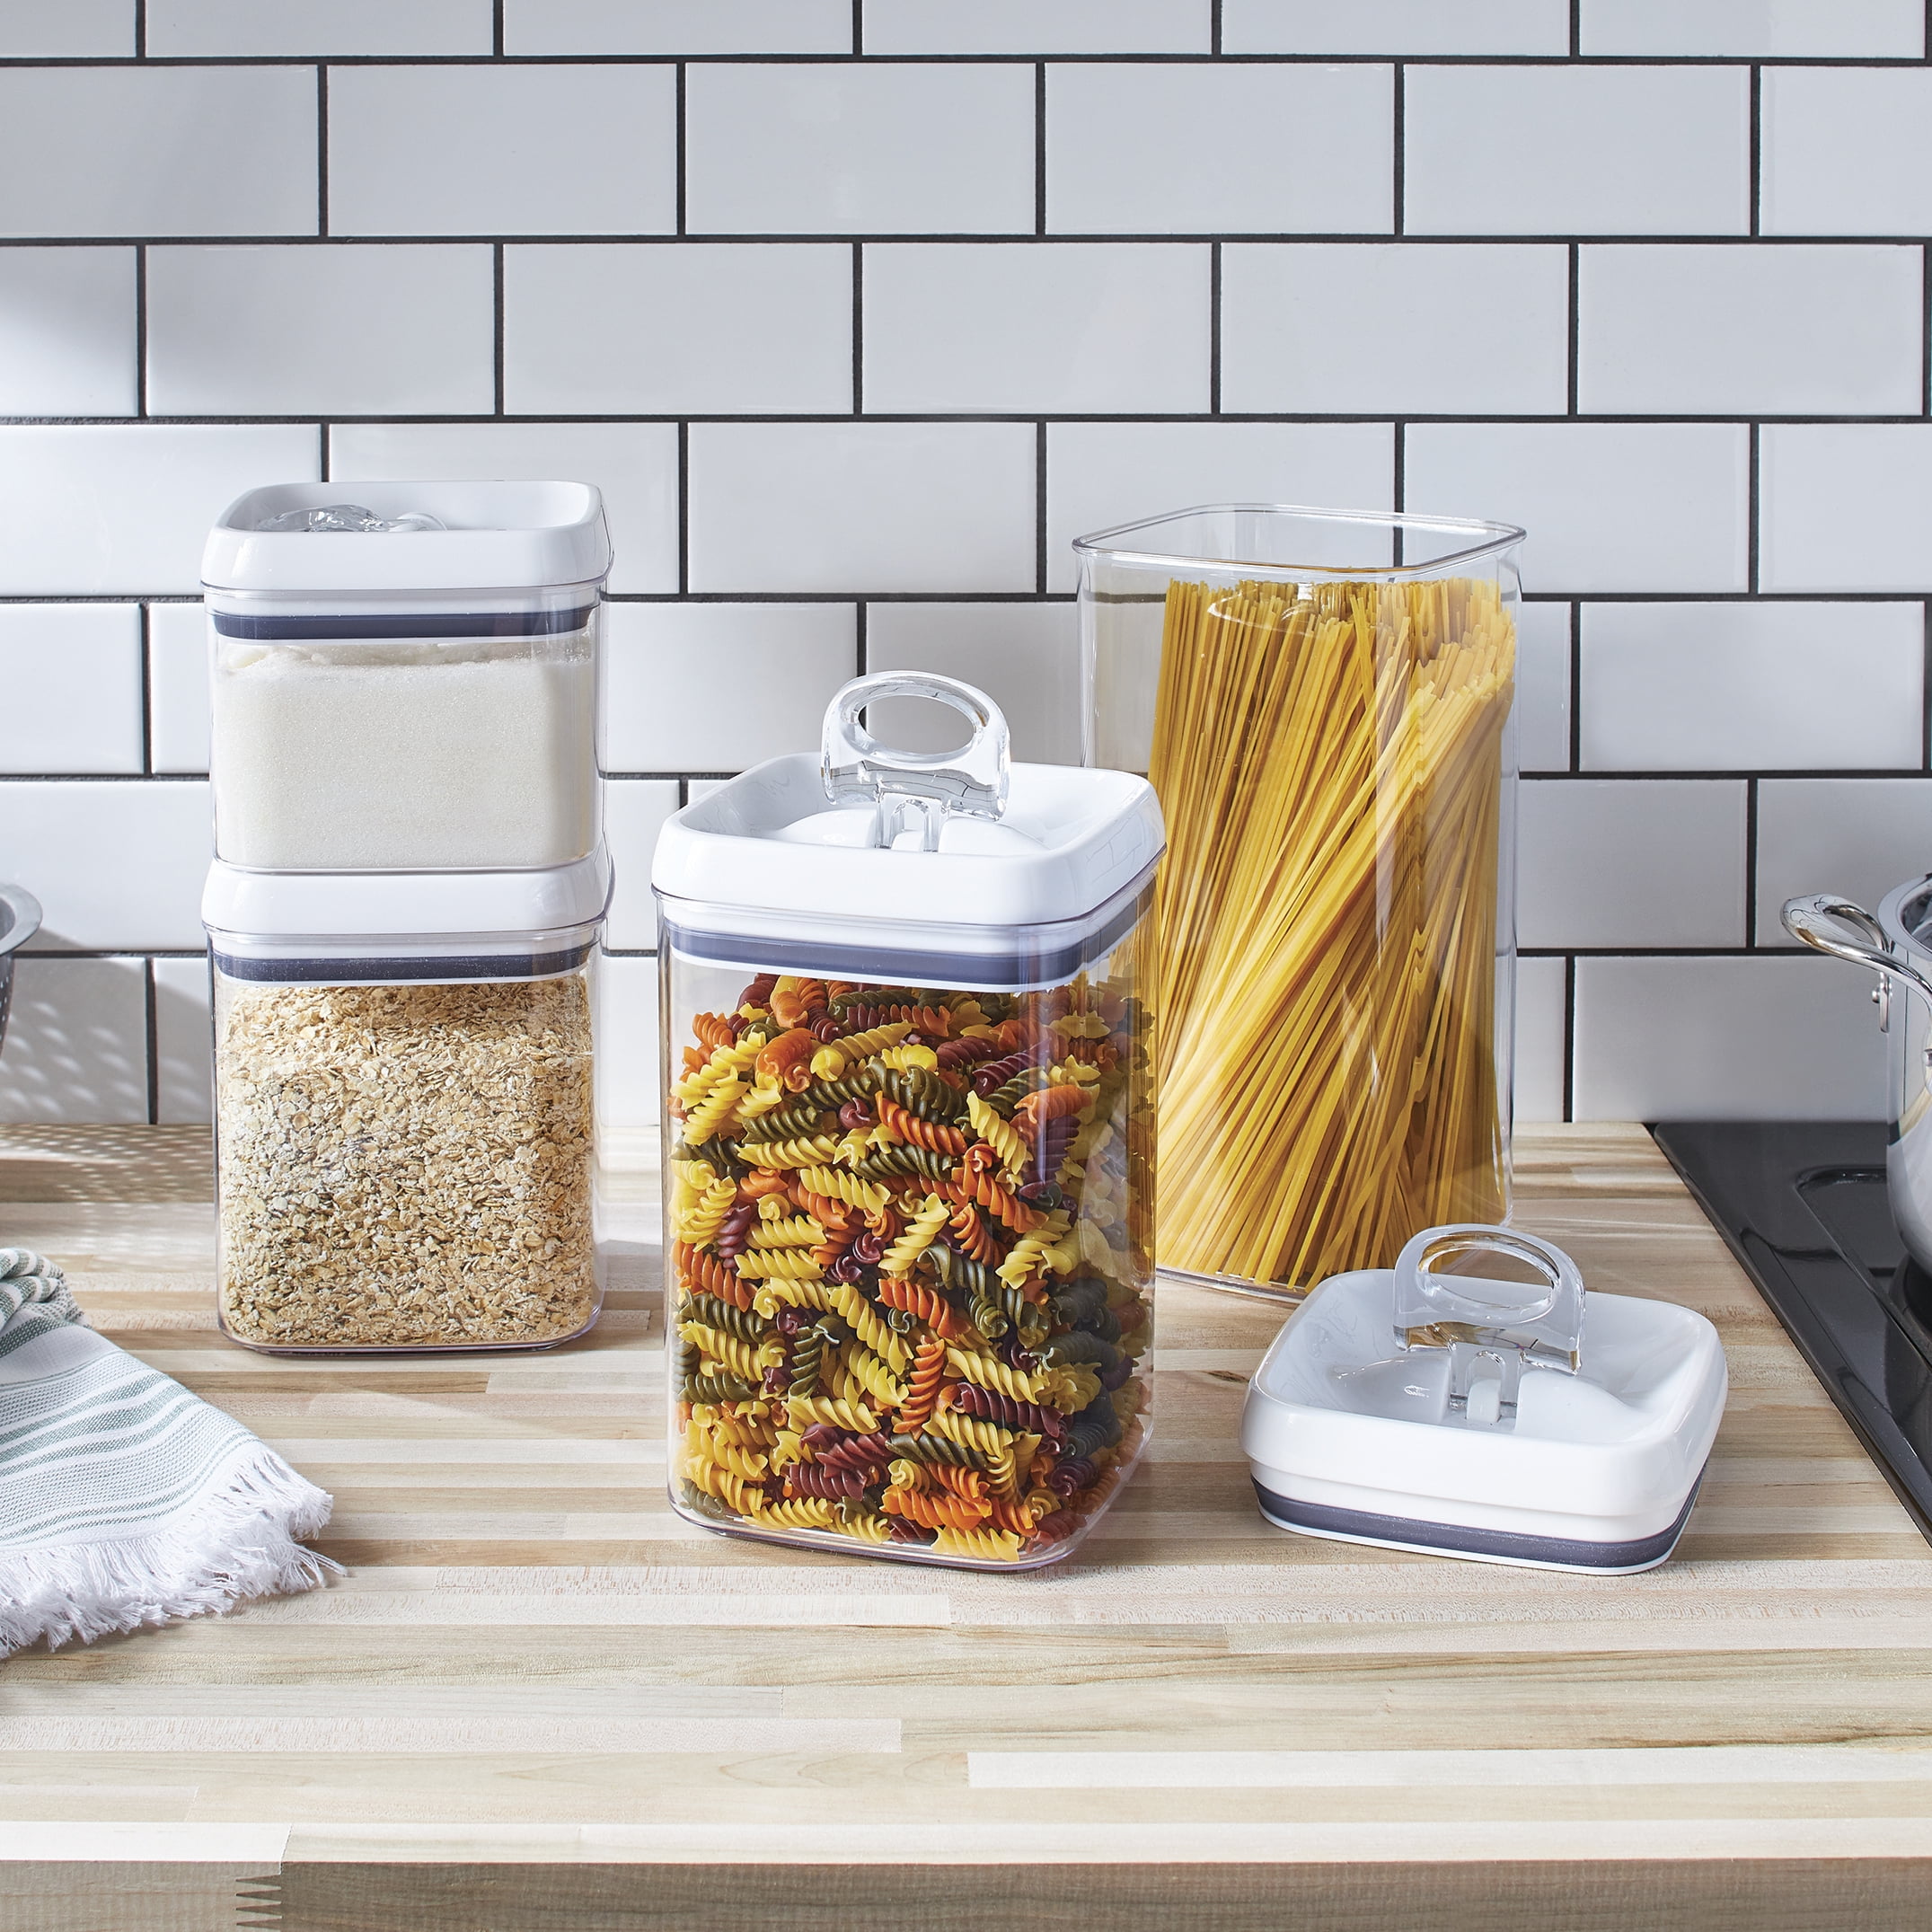 Better Homes & Gardens 10-Piece Canister Set Only $25 on Walmart